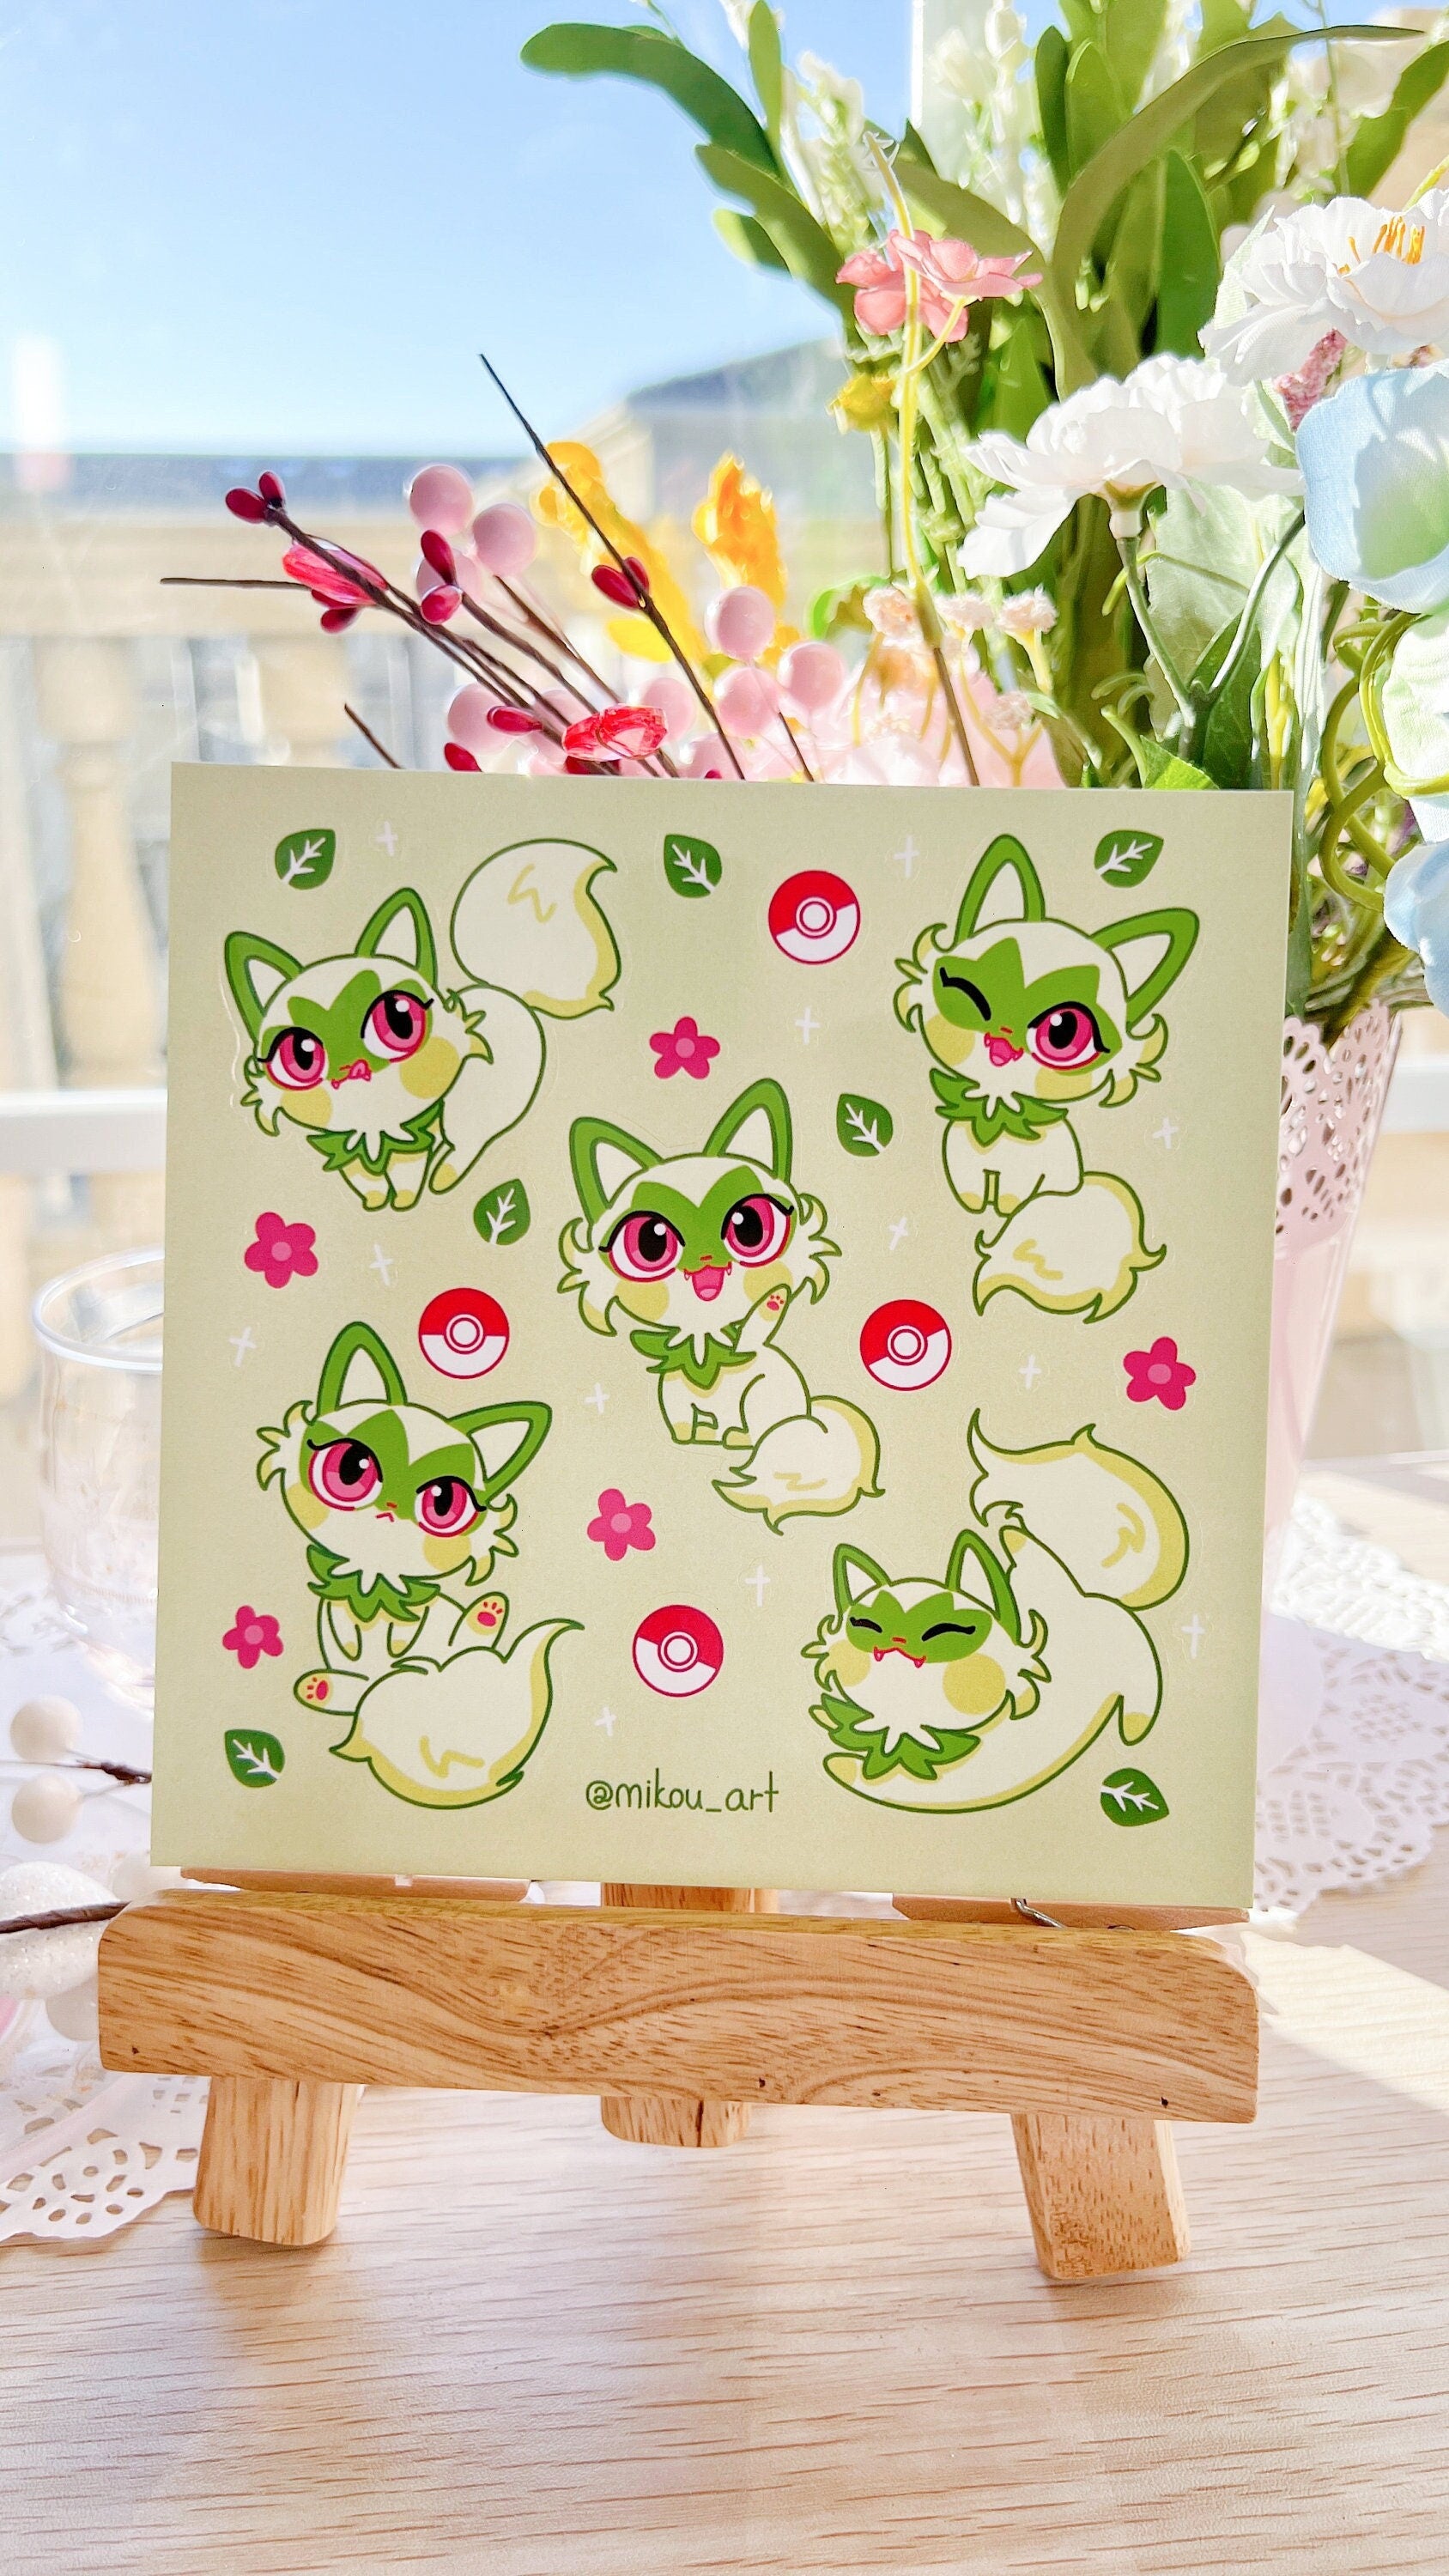 Kawaii Plant Stickers and Decal Sheets